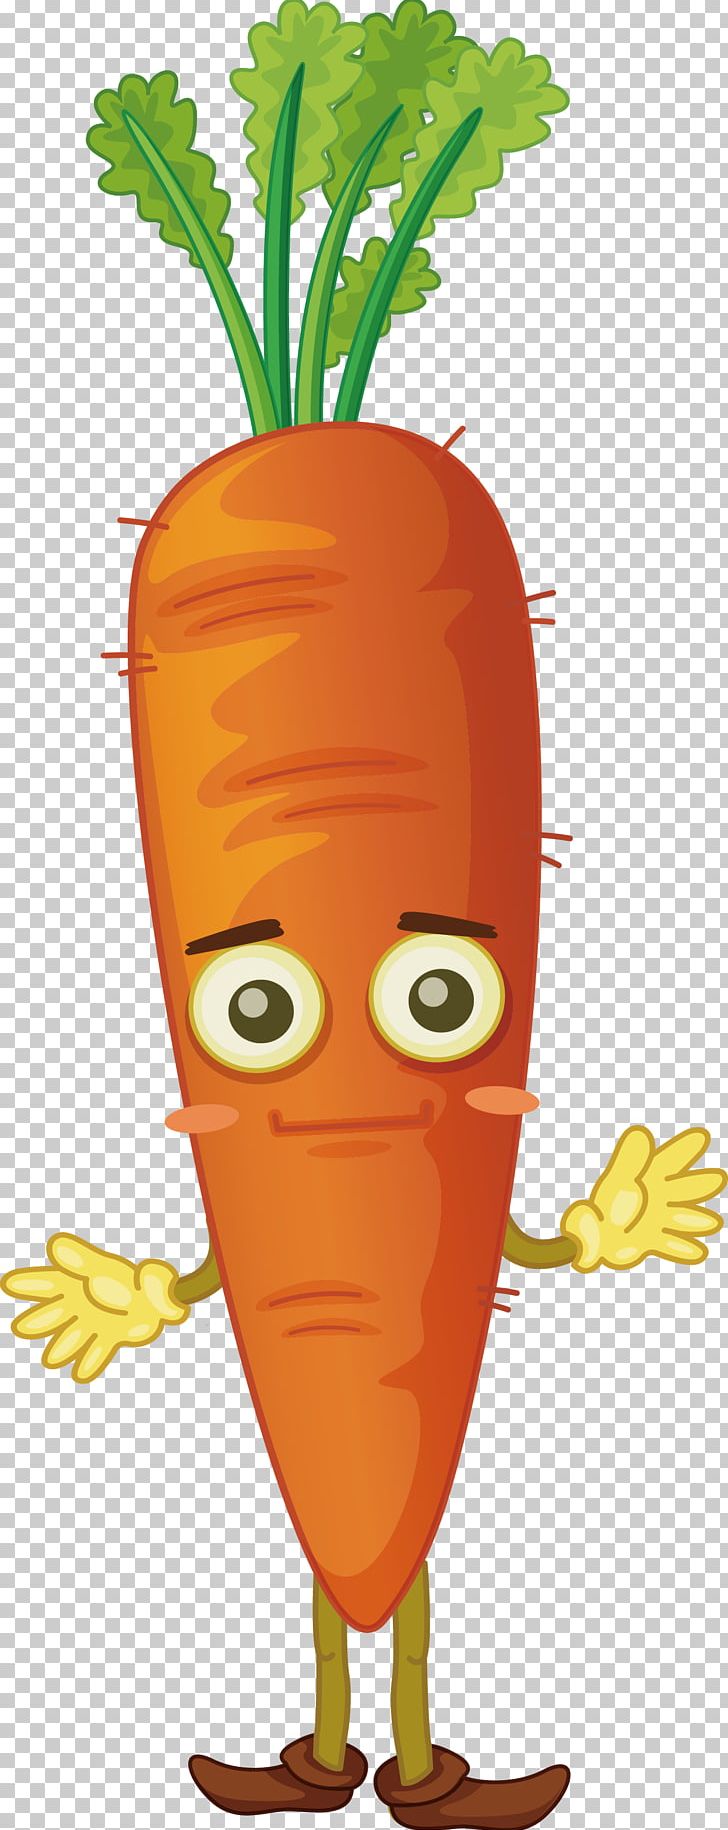 Carrot Vegetable Stock Illustration PNG, Clipart, Balloon Cartoon, Cartoon, Cartoon Character, Cartoon Cloud, Cartoon Eyes Free PNG Download